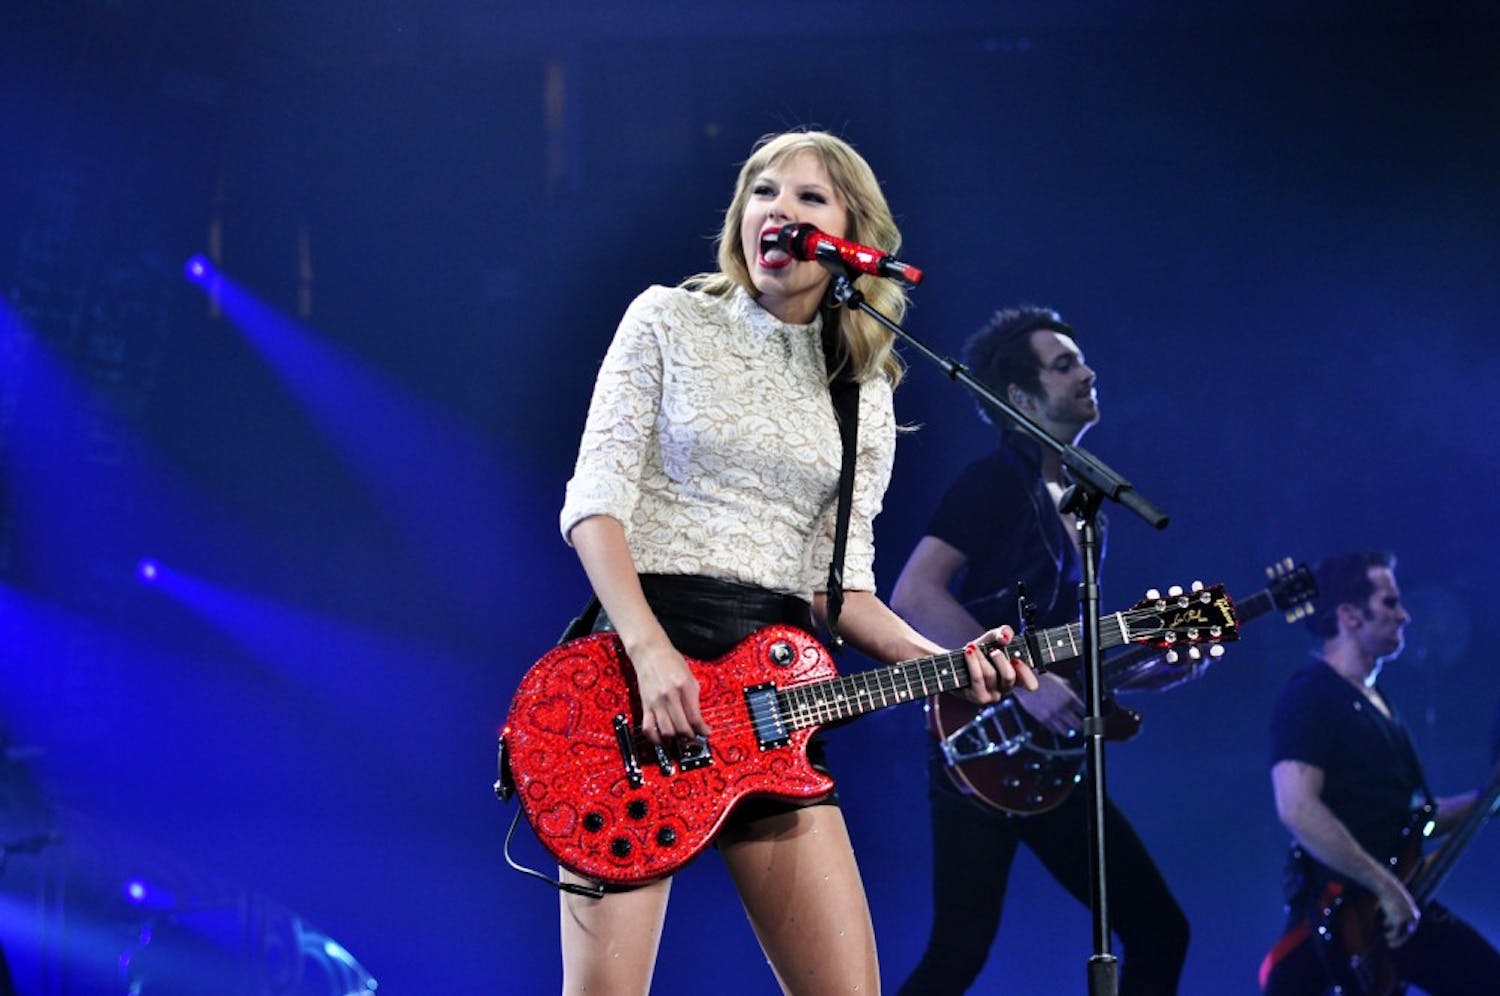 	Swift opened the show to screaming fans with &#8220;State of Grace&#8221; off her new album, &#8220;Red.&#8221;